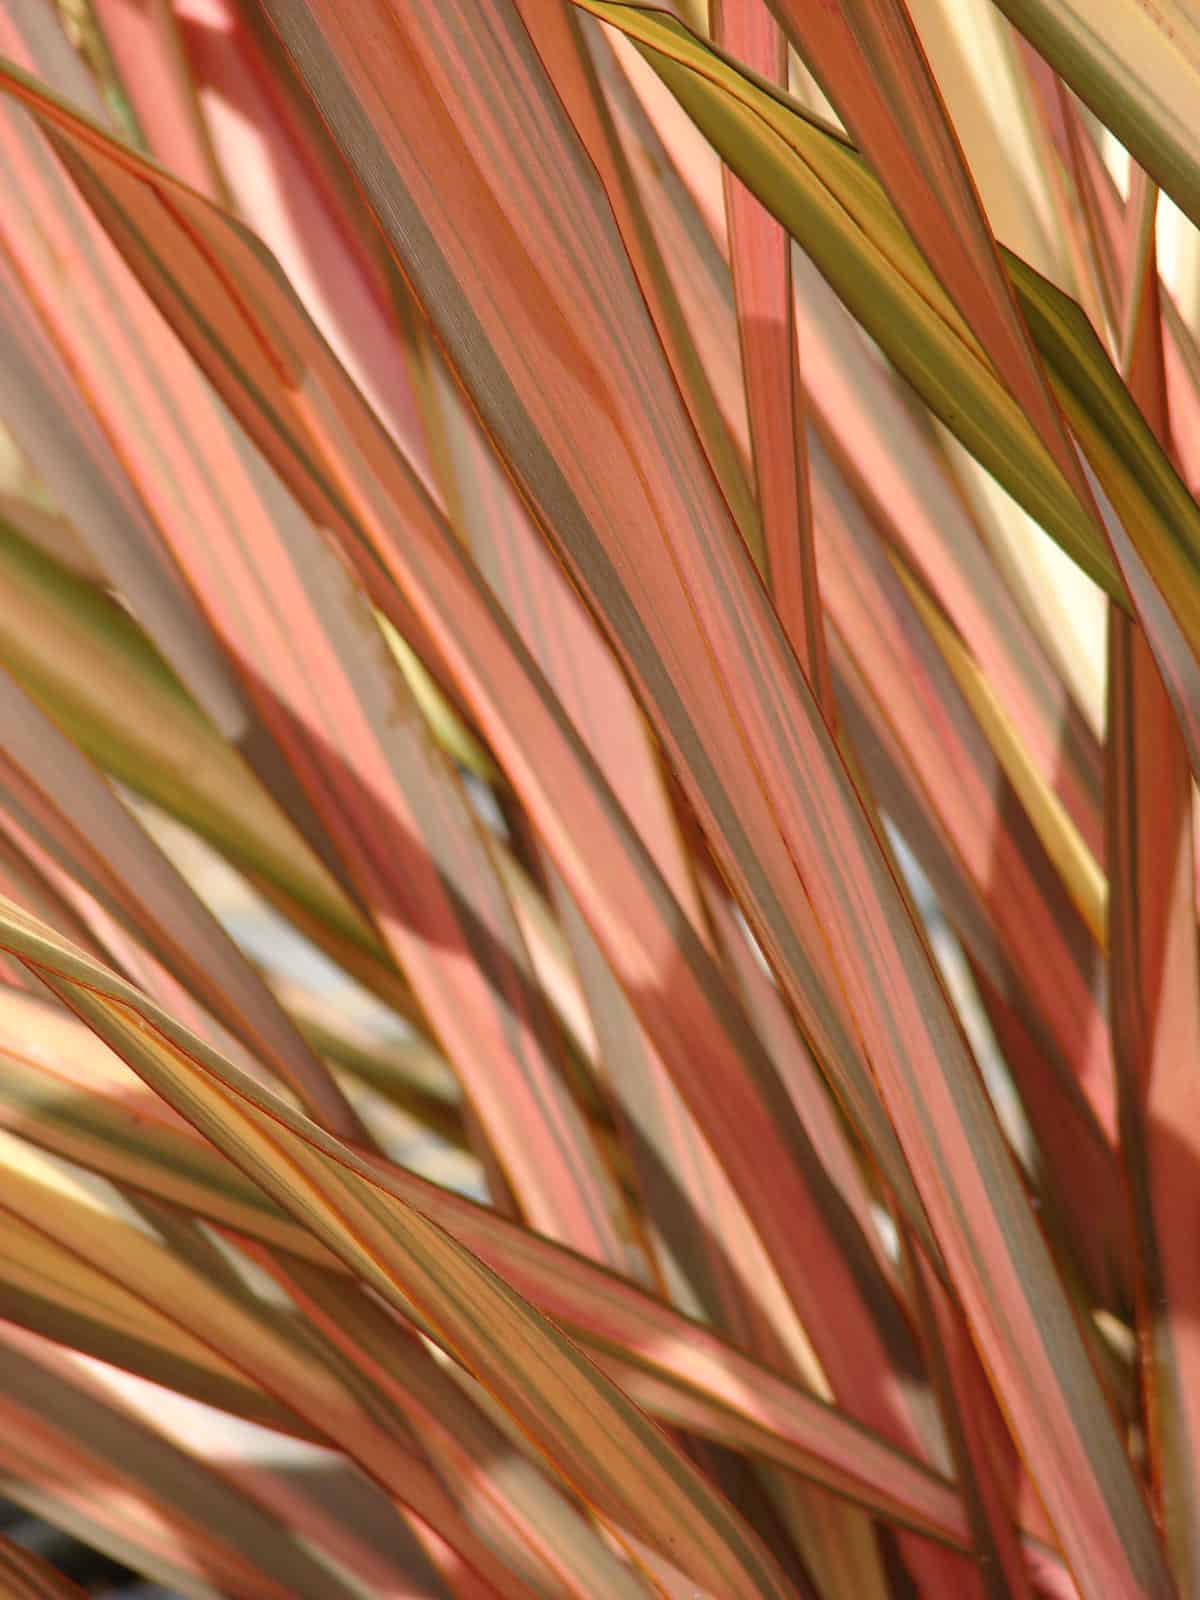 Close-up of interwoven red and green plant leaves.